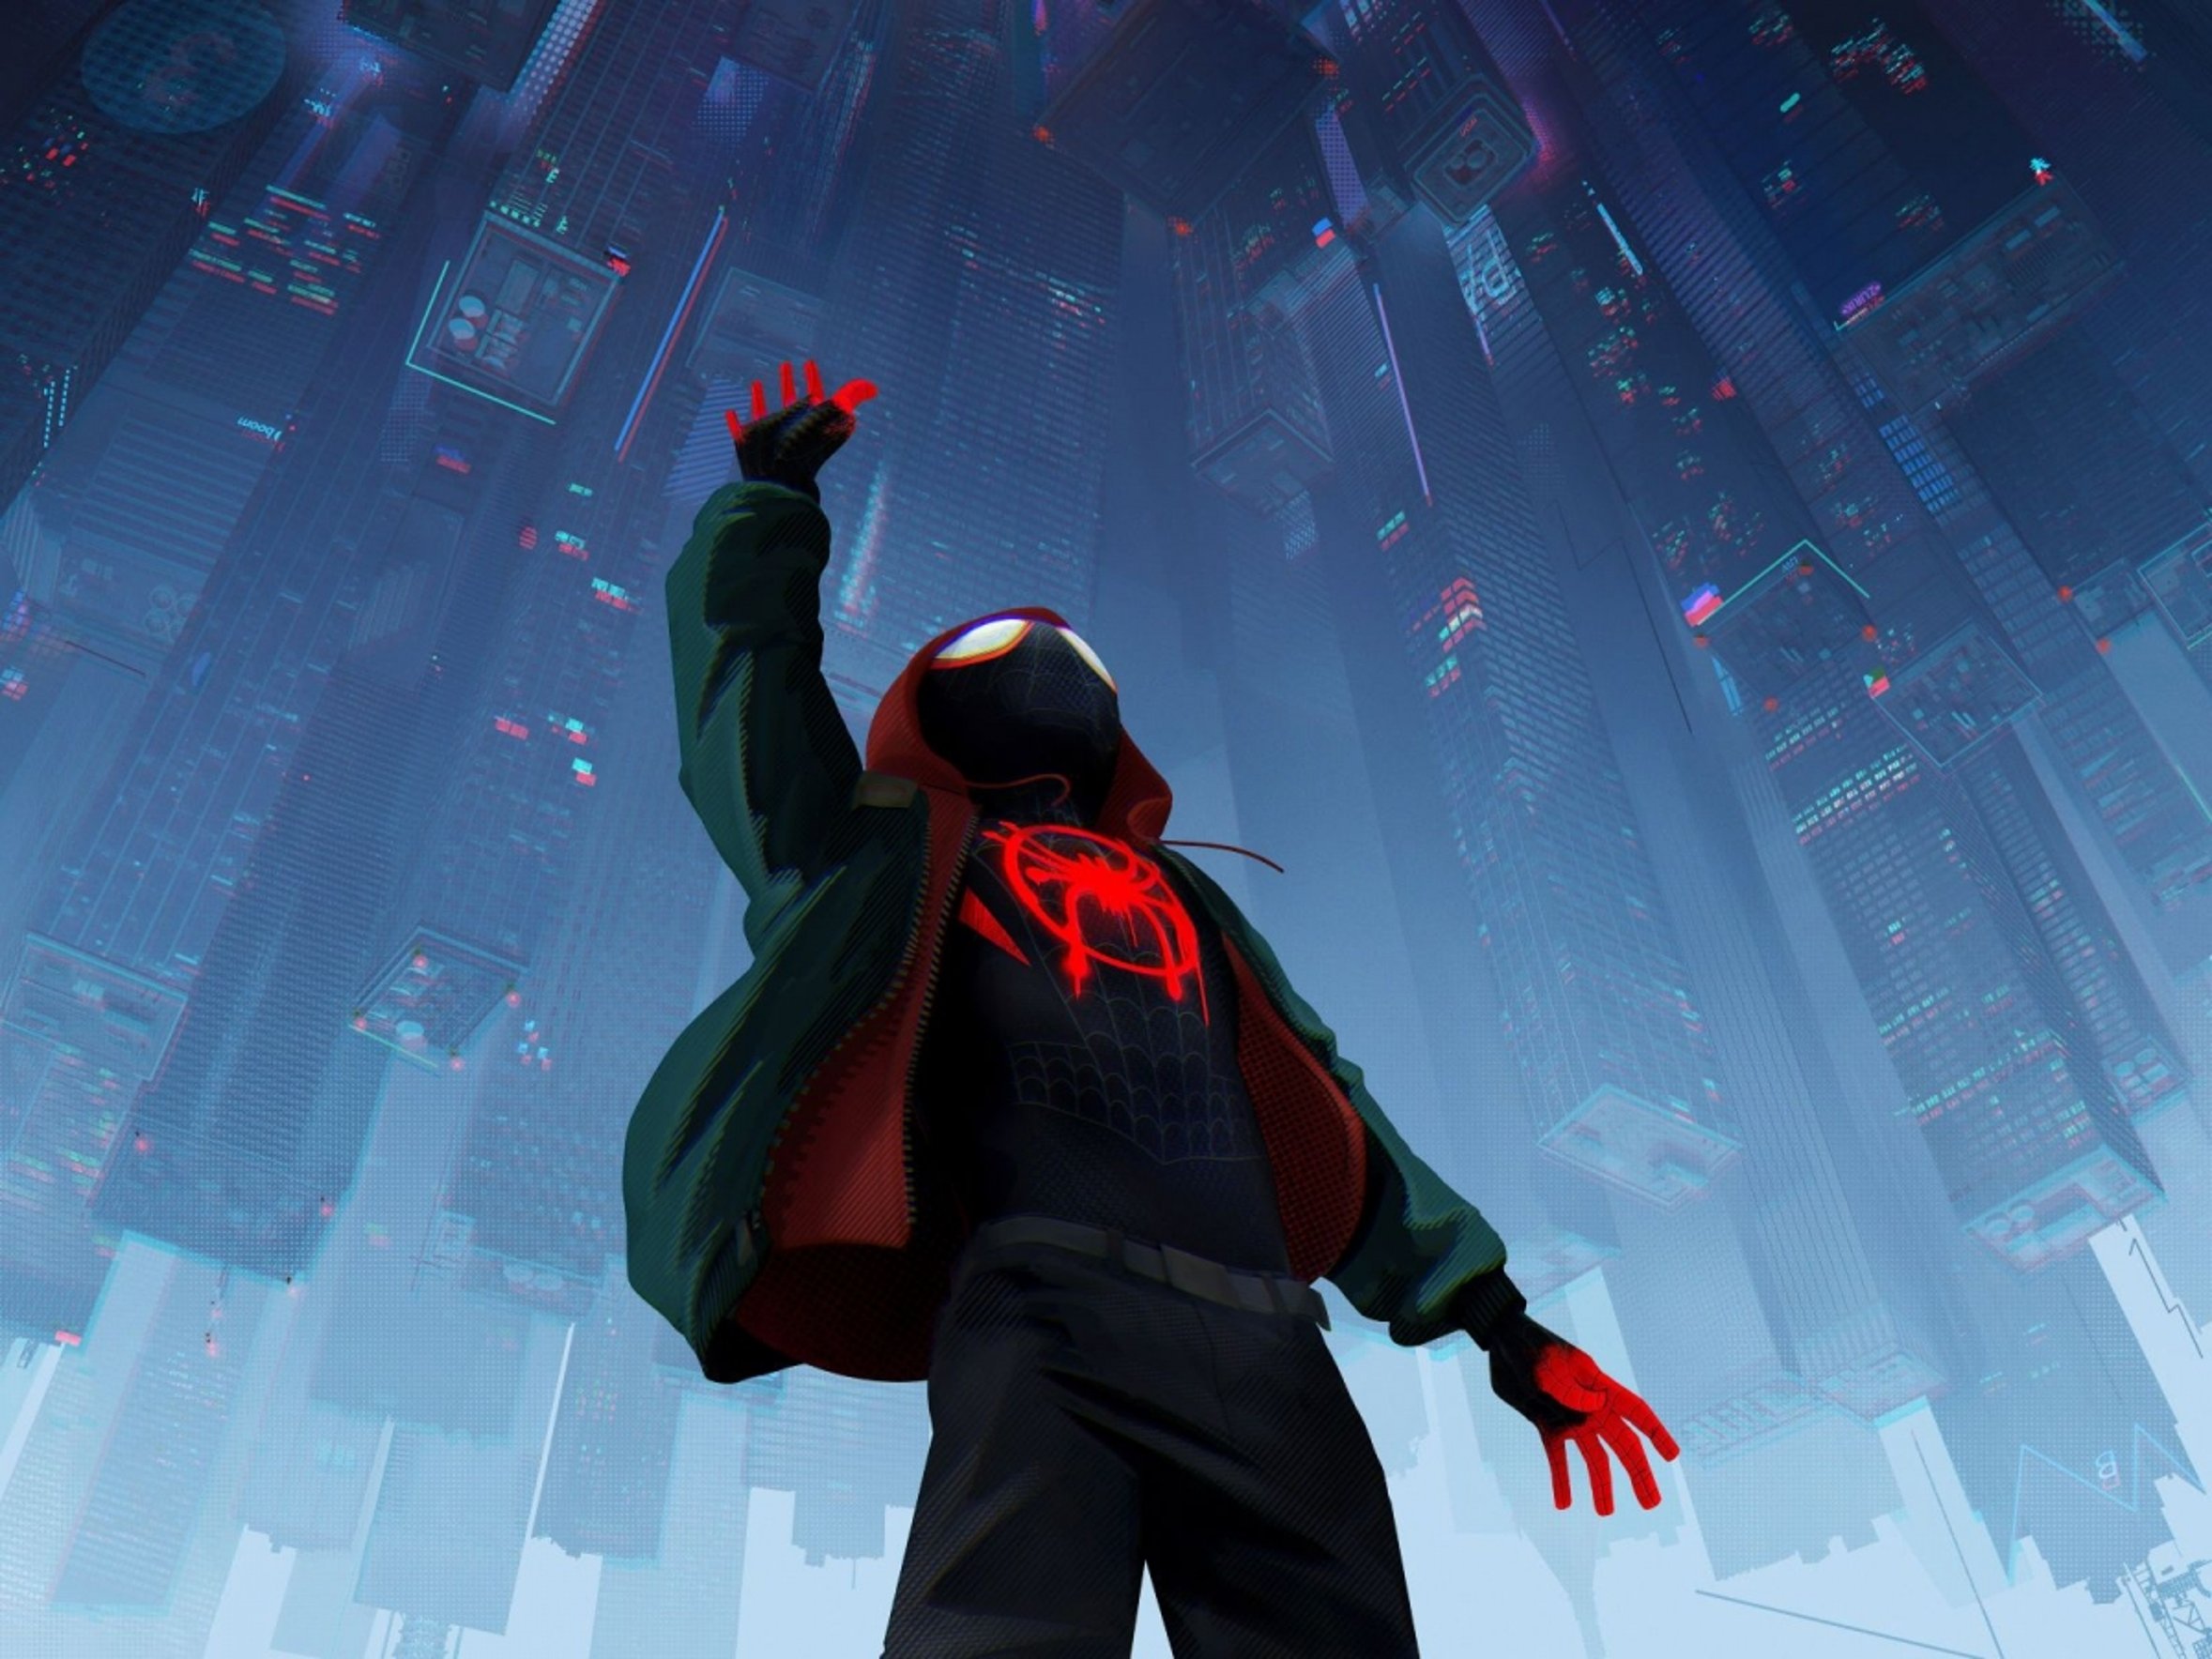 Spider-Man: Into The Spiderverse - A Fresh, Entertaining Version of Our Friendly Neighborhood Superhero